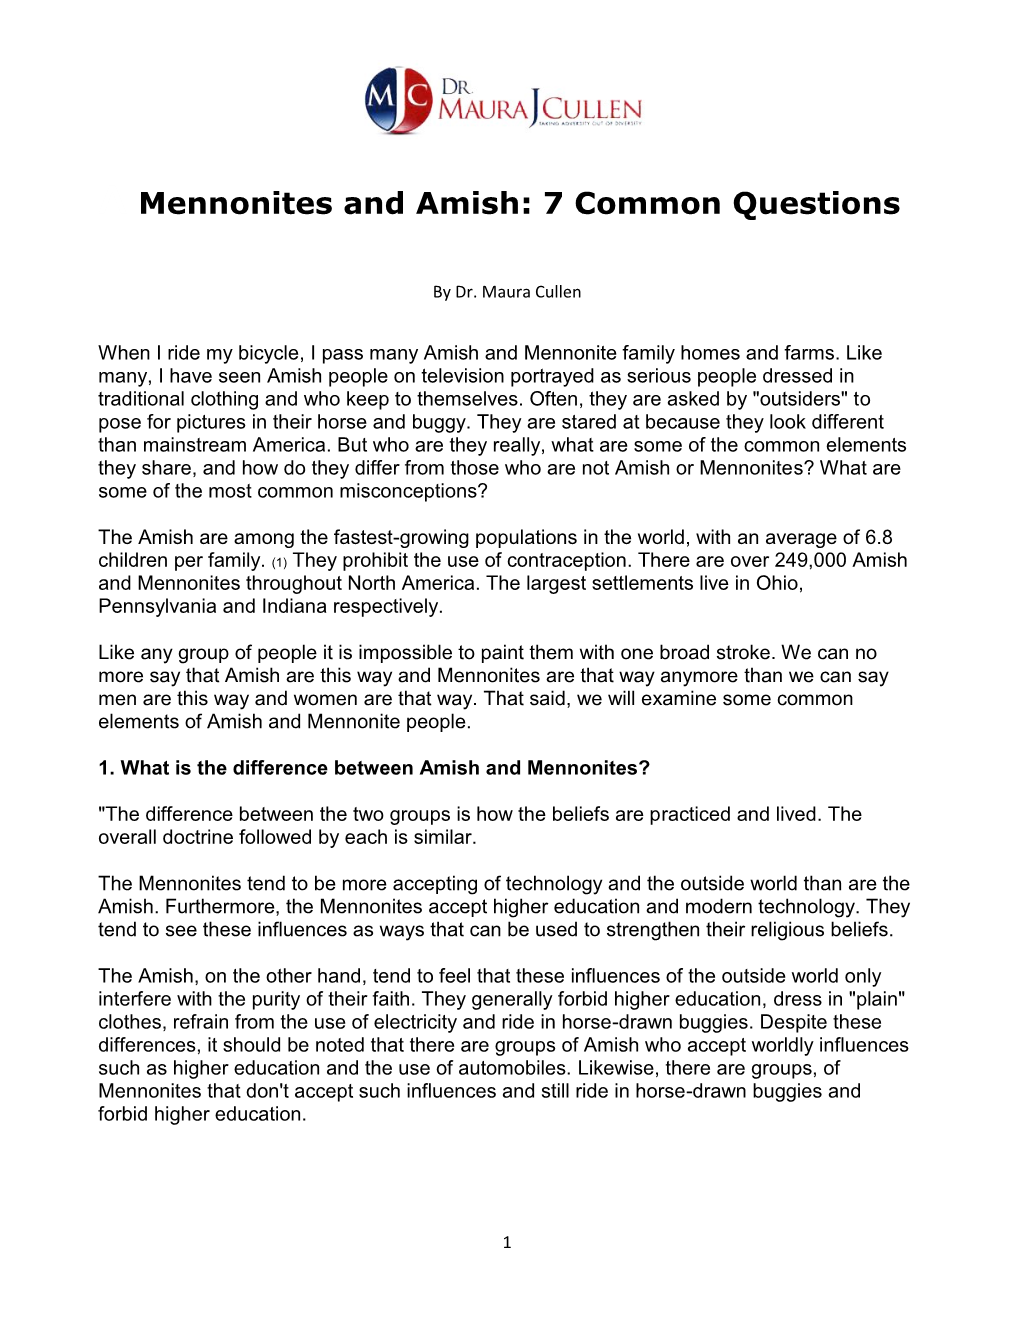 Mennonites and Amish 7 Common Questions